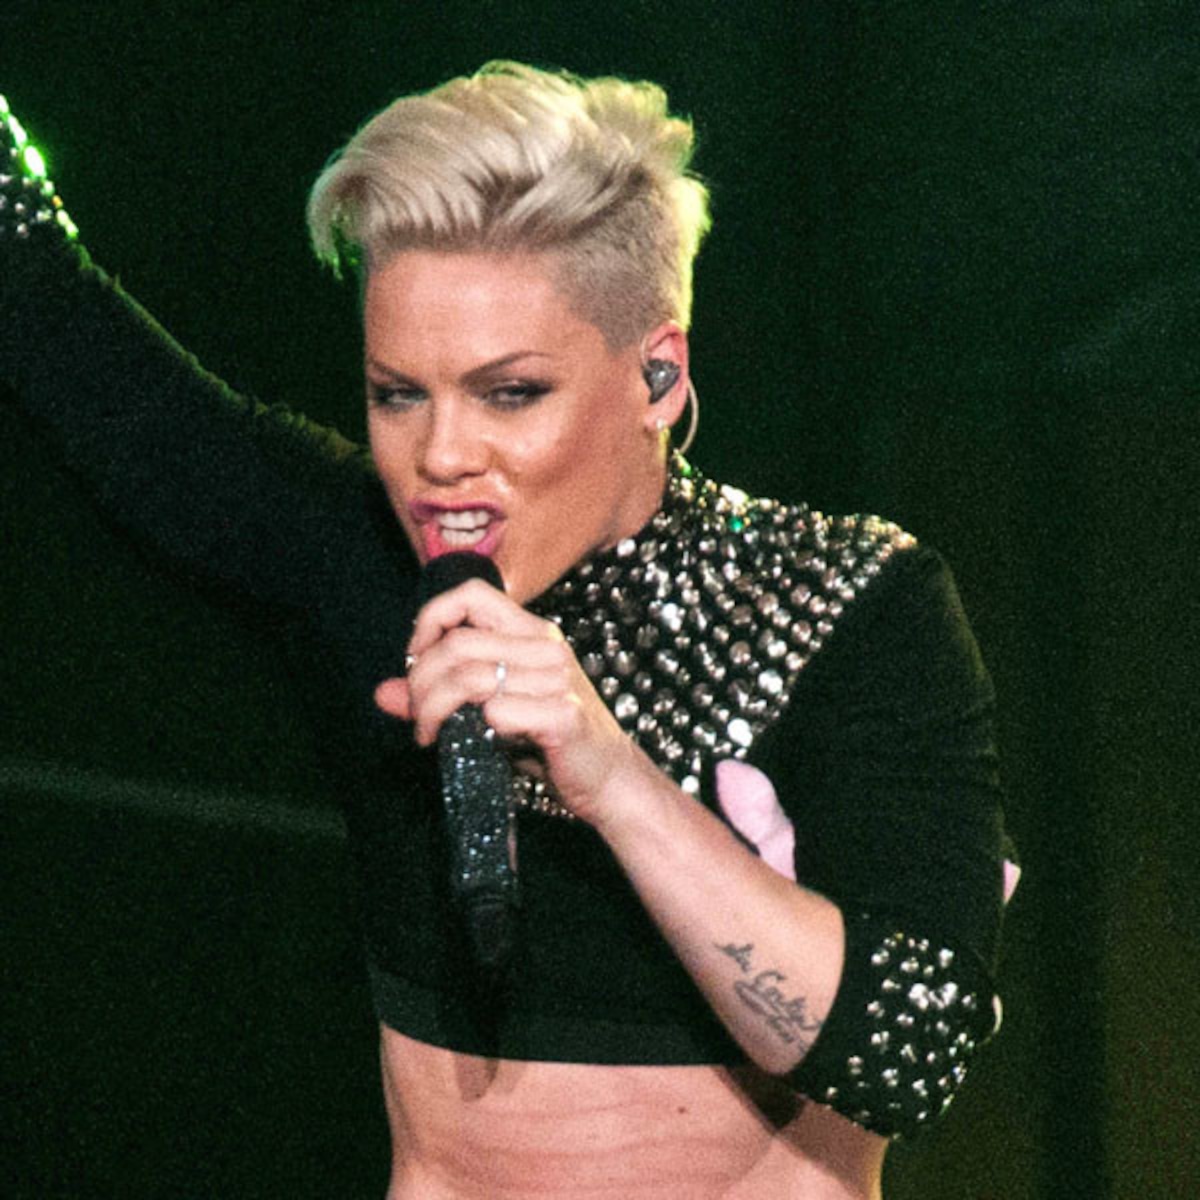 Pink Paparazzo Allegedly Kicked in the Groin by Man - E! Online